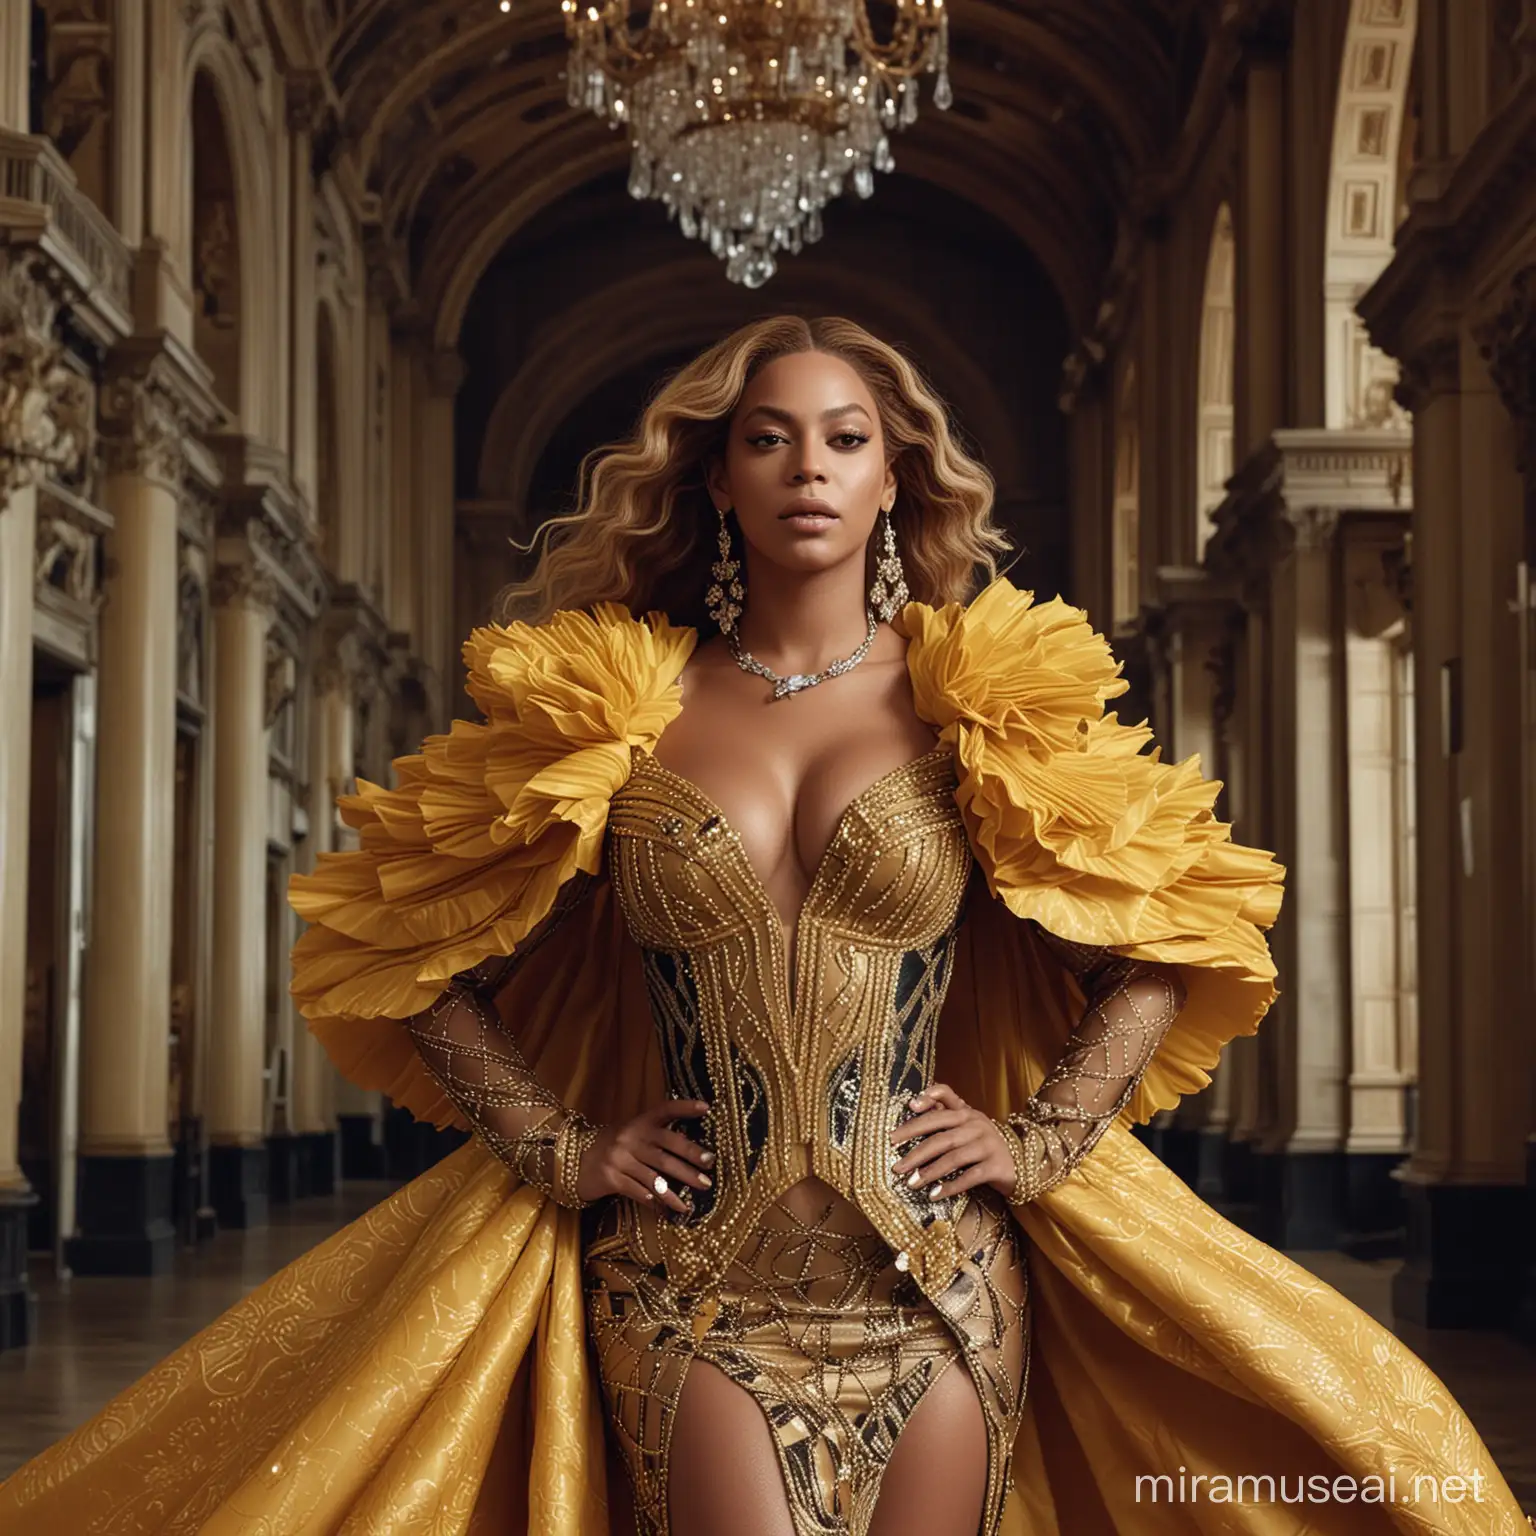 Amidst the grandeur of a historic opera house, Beyoncé stuns in Louis Vuitton's avant-garde creations. The photography captures her in a whirlwind of movement, each frame radiating with the energy of her electrifying performance. Against the opulent backdrop, Beyoncé's presence commands attention, effortlessly blending haute couture with streetwise elegance.